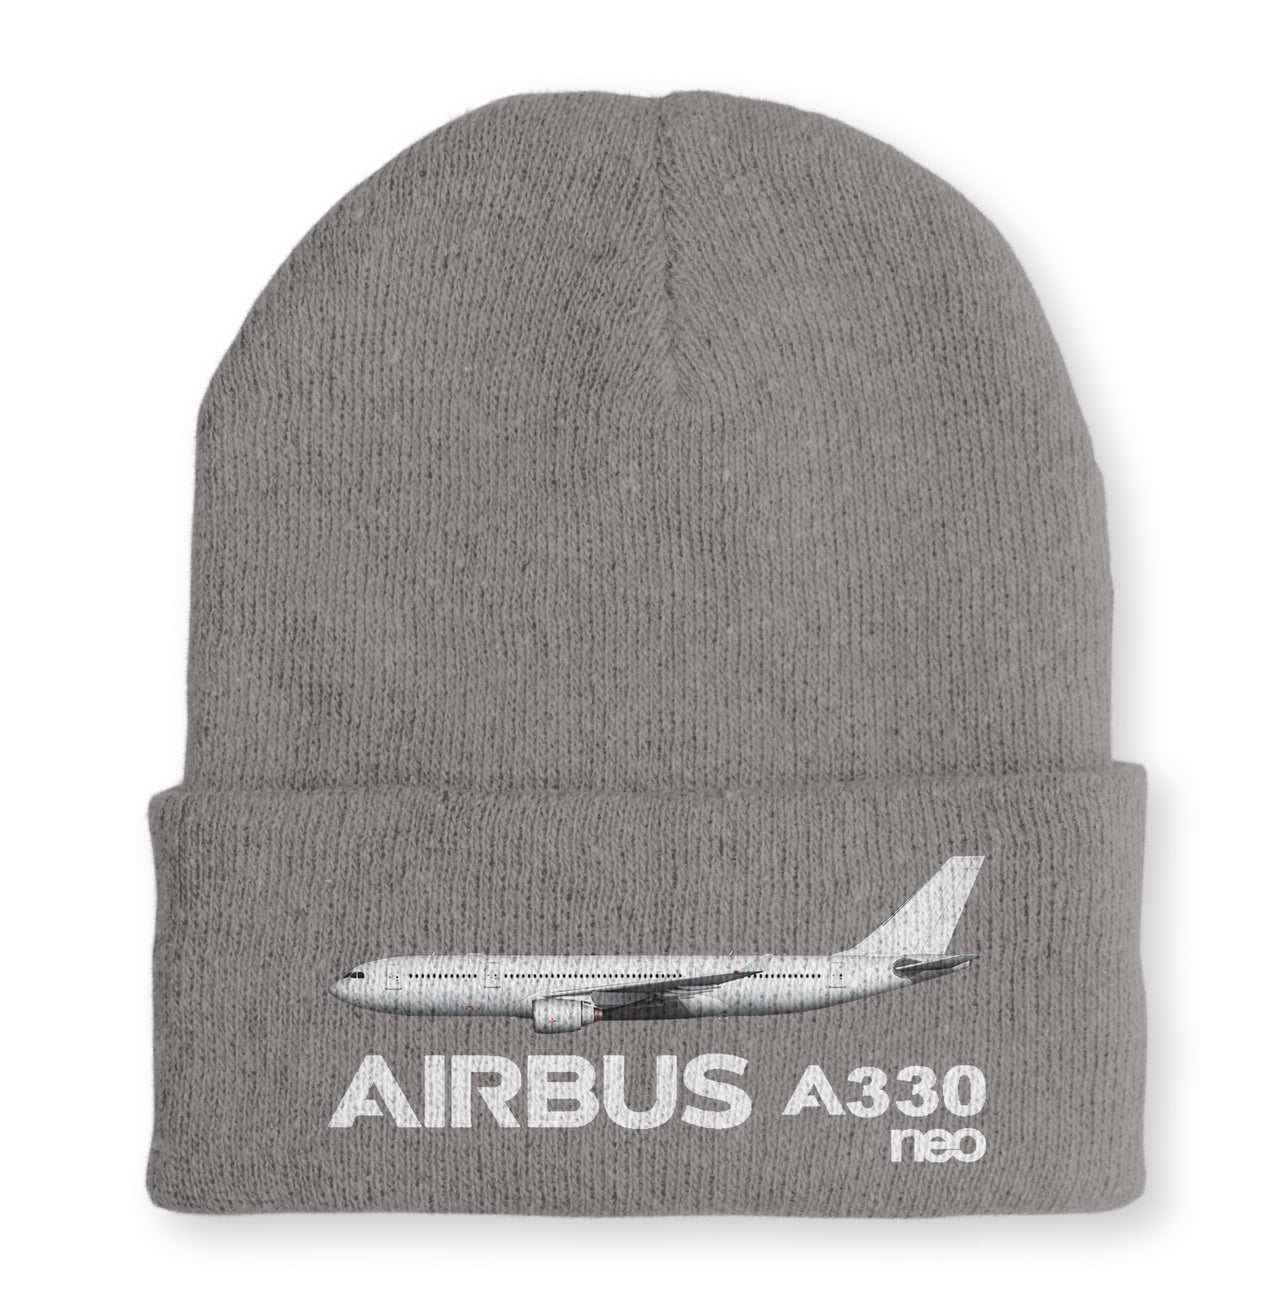 The Airbus A330neo Embroidered Beanies